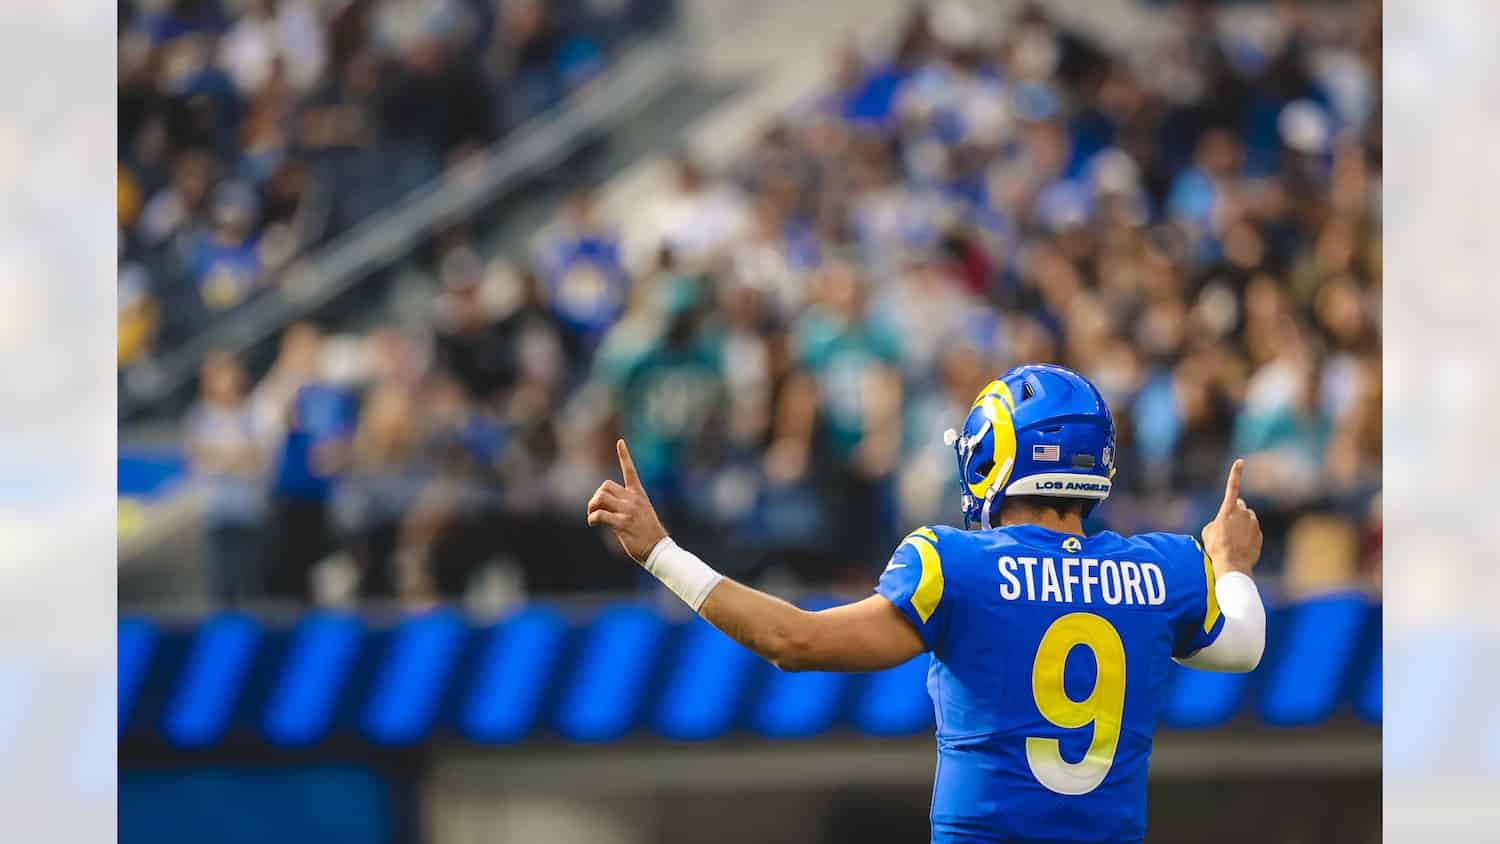 Los Angeles Rams Quarterback Matthew Stafford Has A Bounce Back Performance Against The Jacksonville Jaguars. Photo Credit: Brevin Townsell | LA Rams